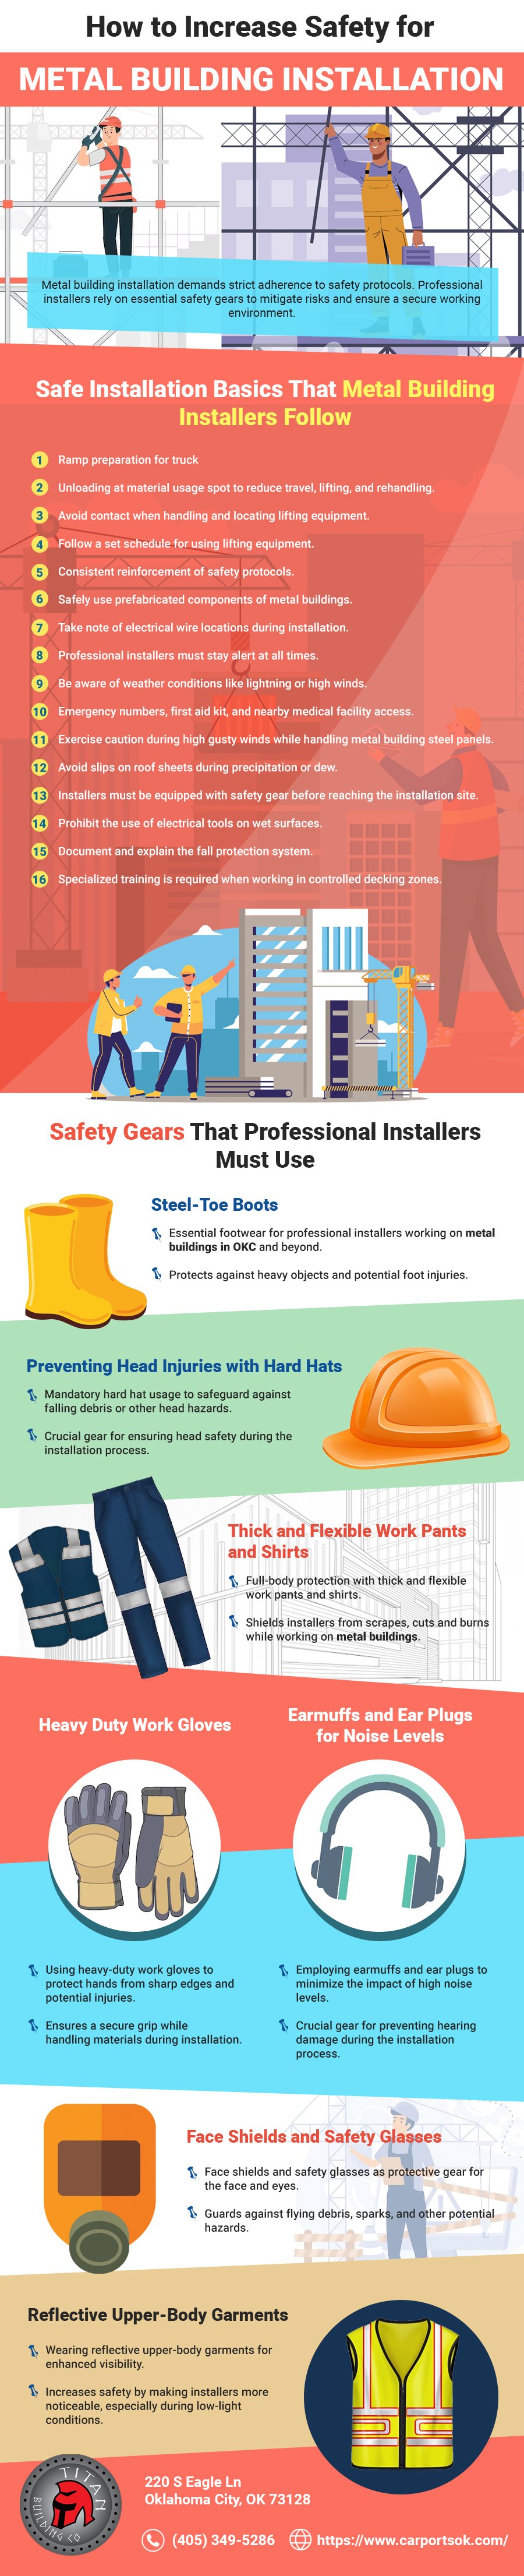 How to Increase Safety for Metal Building Installation-Infographic